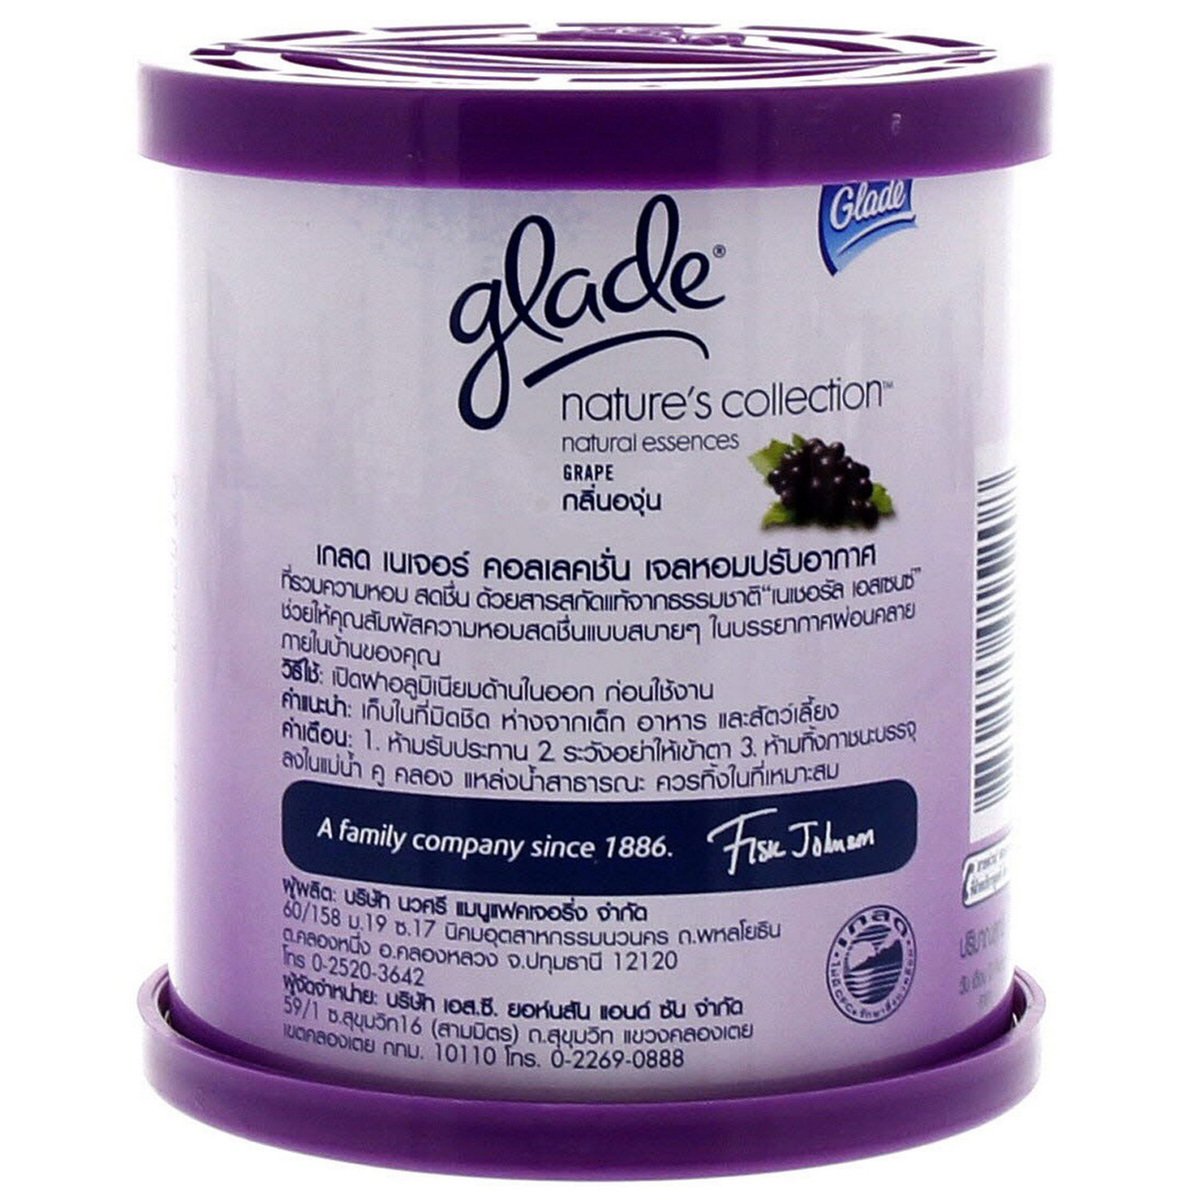 Glade Grape Nature's Collection 70 Gm